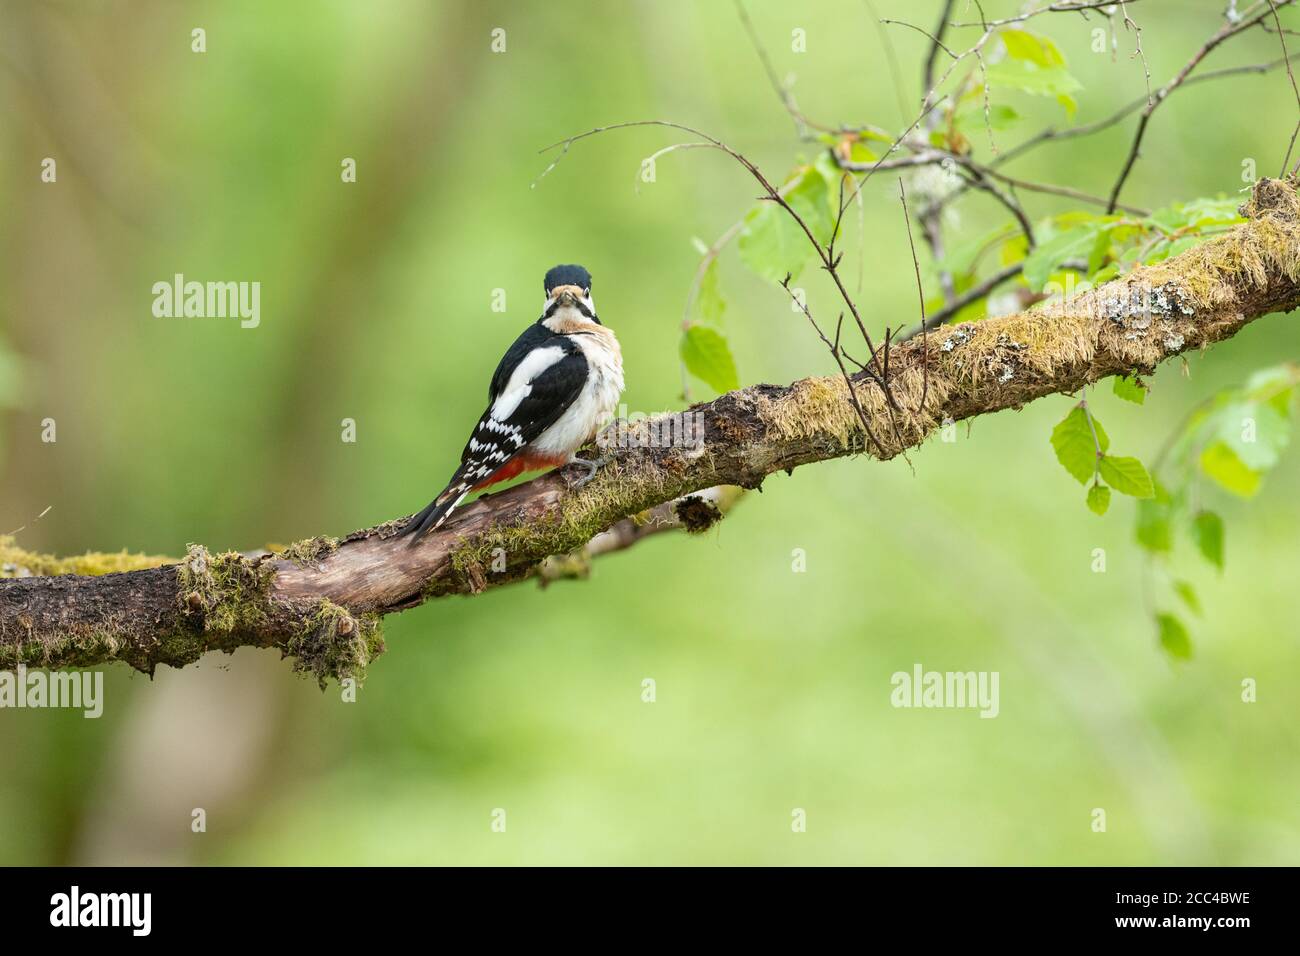 Male Great Spotted Woodpecker (Dendrocopos major) perched on branch Stock Photo